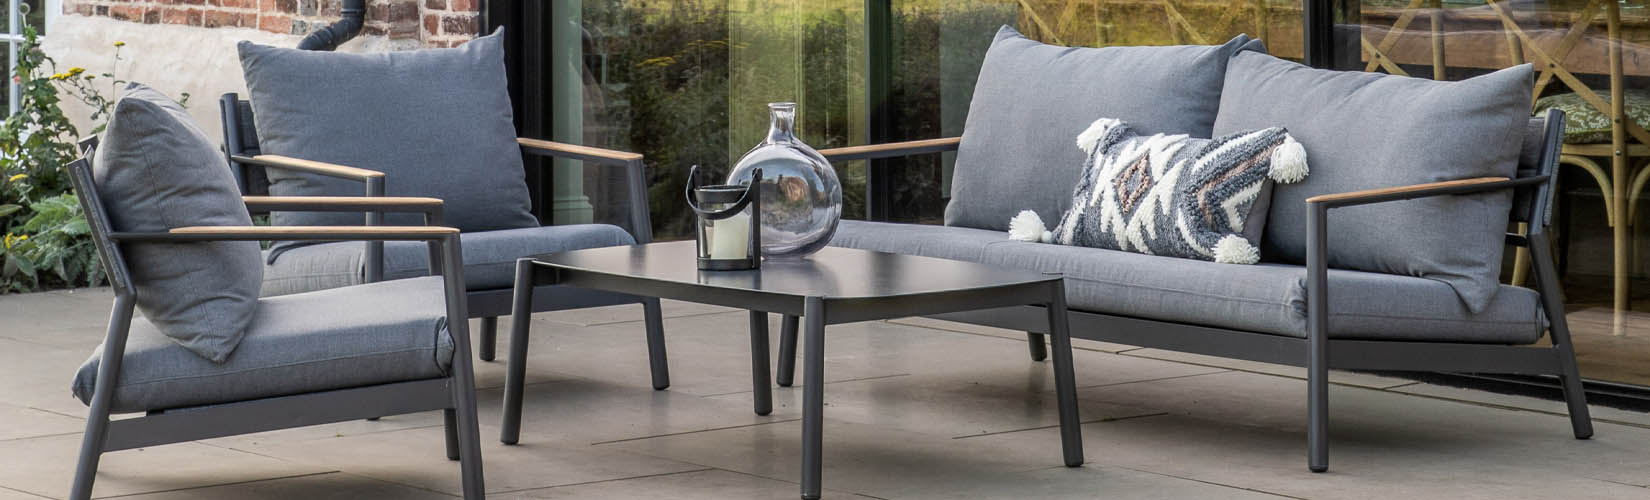 Garden Furniture Care Guide: How to Look After Your Outdoor Furniture